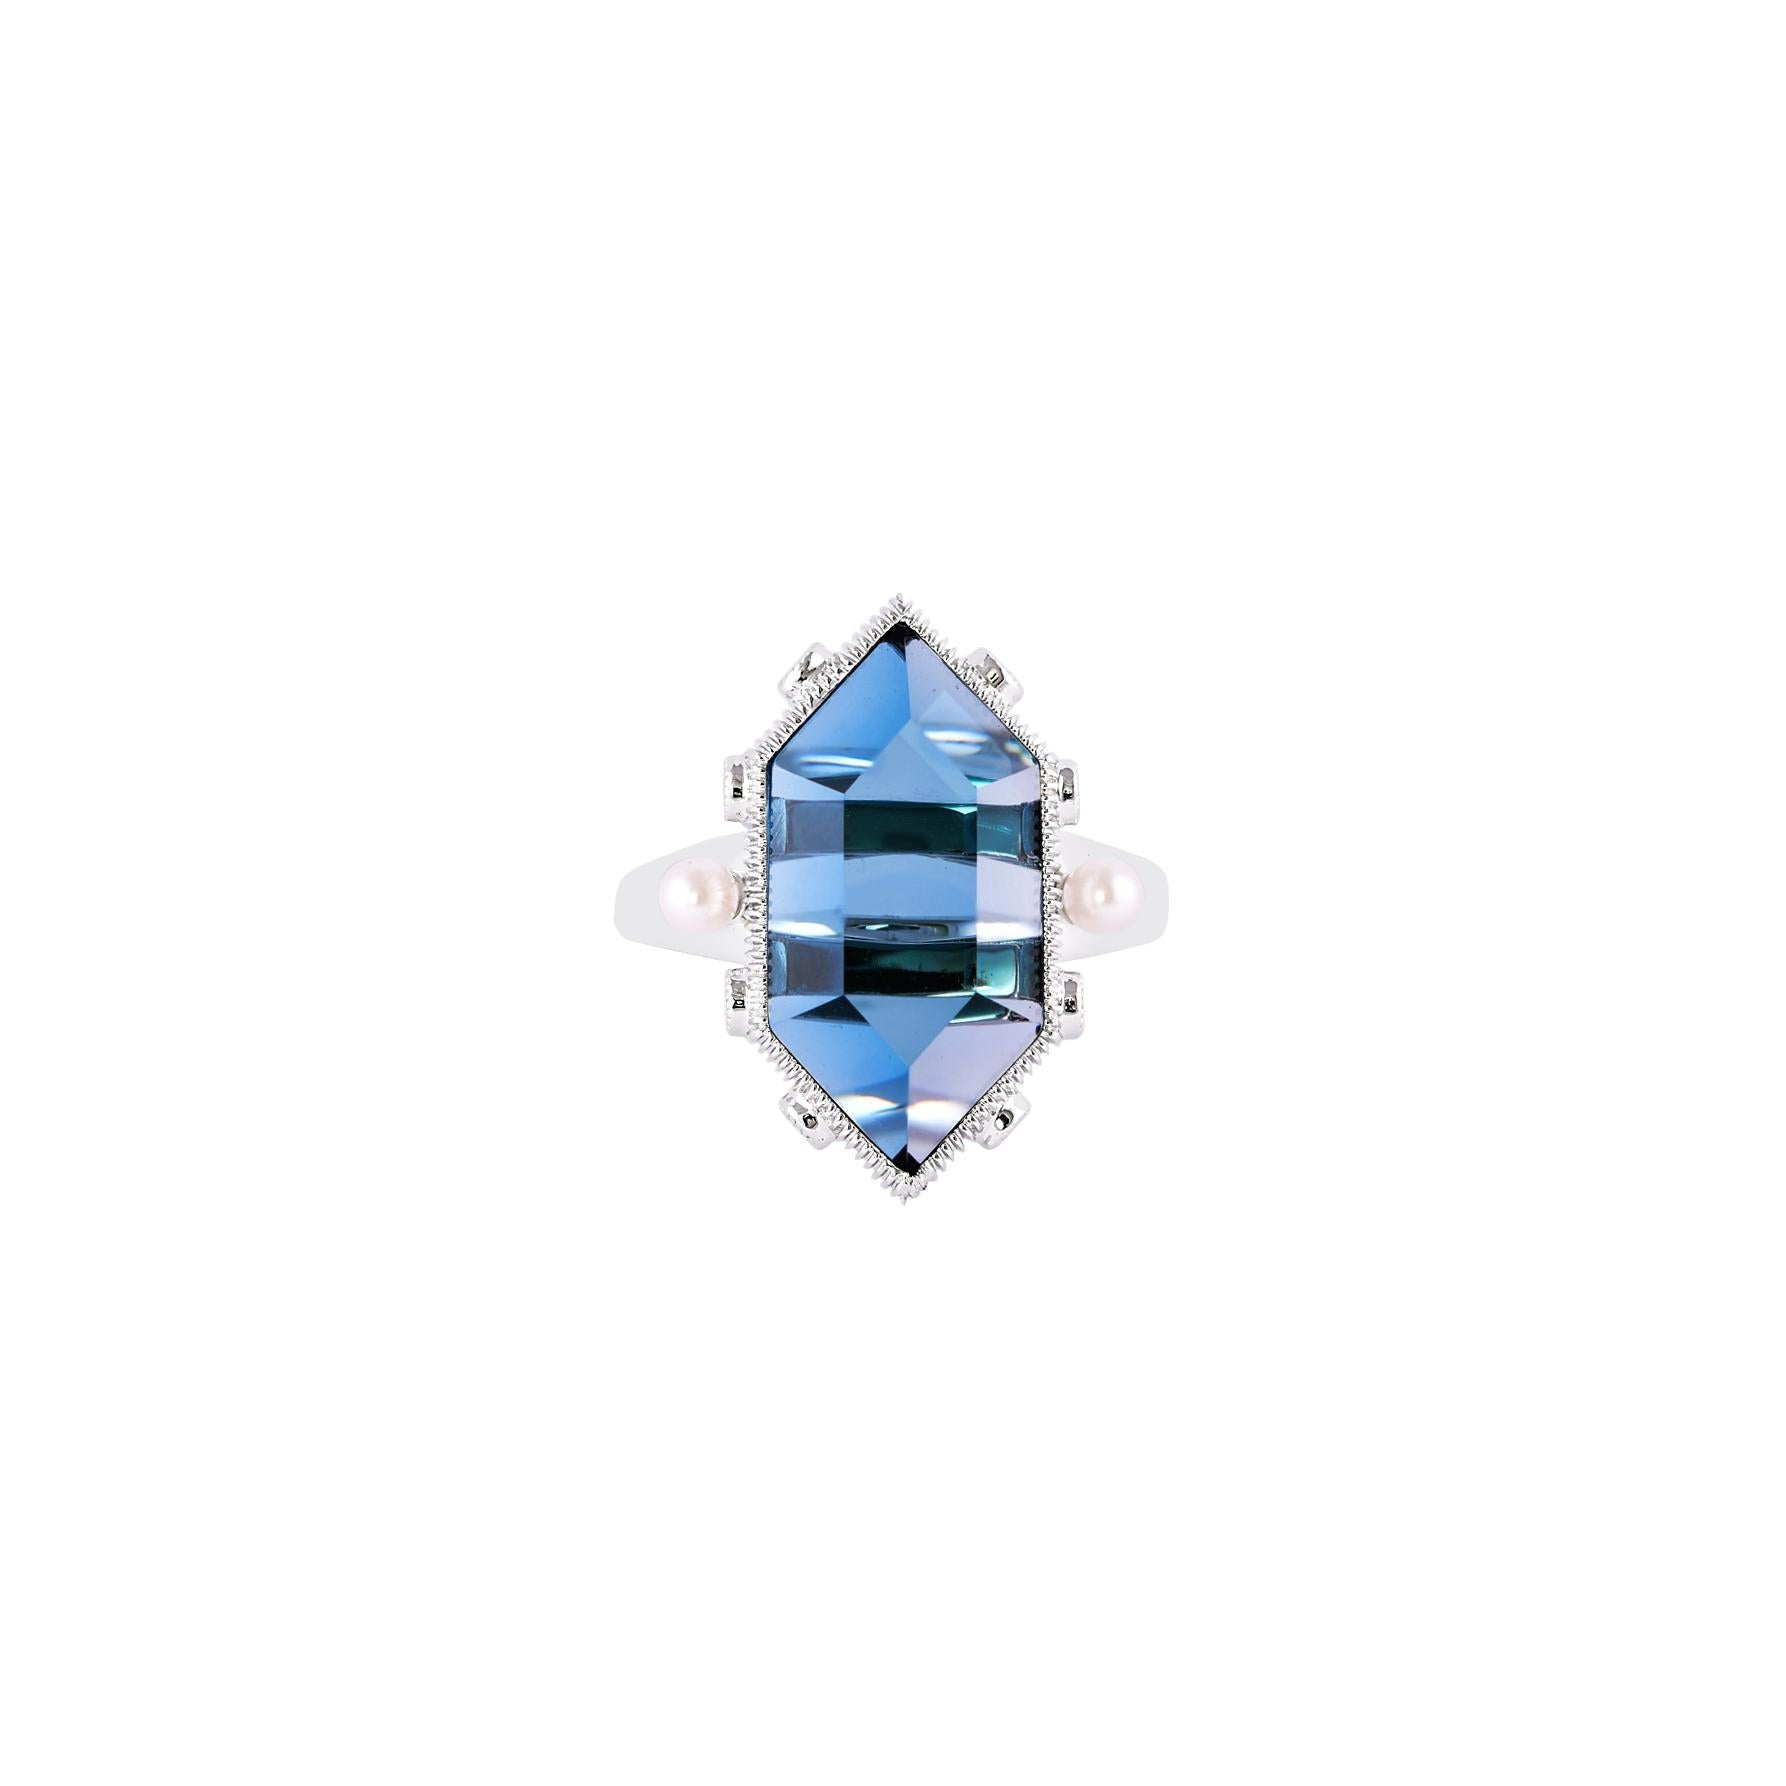 Sunita Nahata presents a series of 'Healing Hexagon' Rings made to wear everyday and bring harmony to the mind, body and soul. 

This is a luxurious london blue topaz ring and this gemstone is particularly known to bring powerful energies to